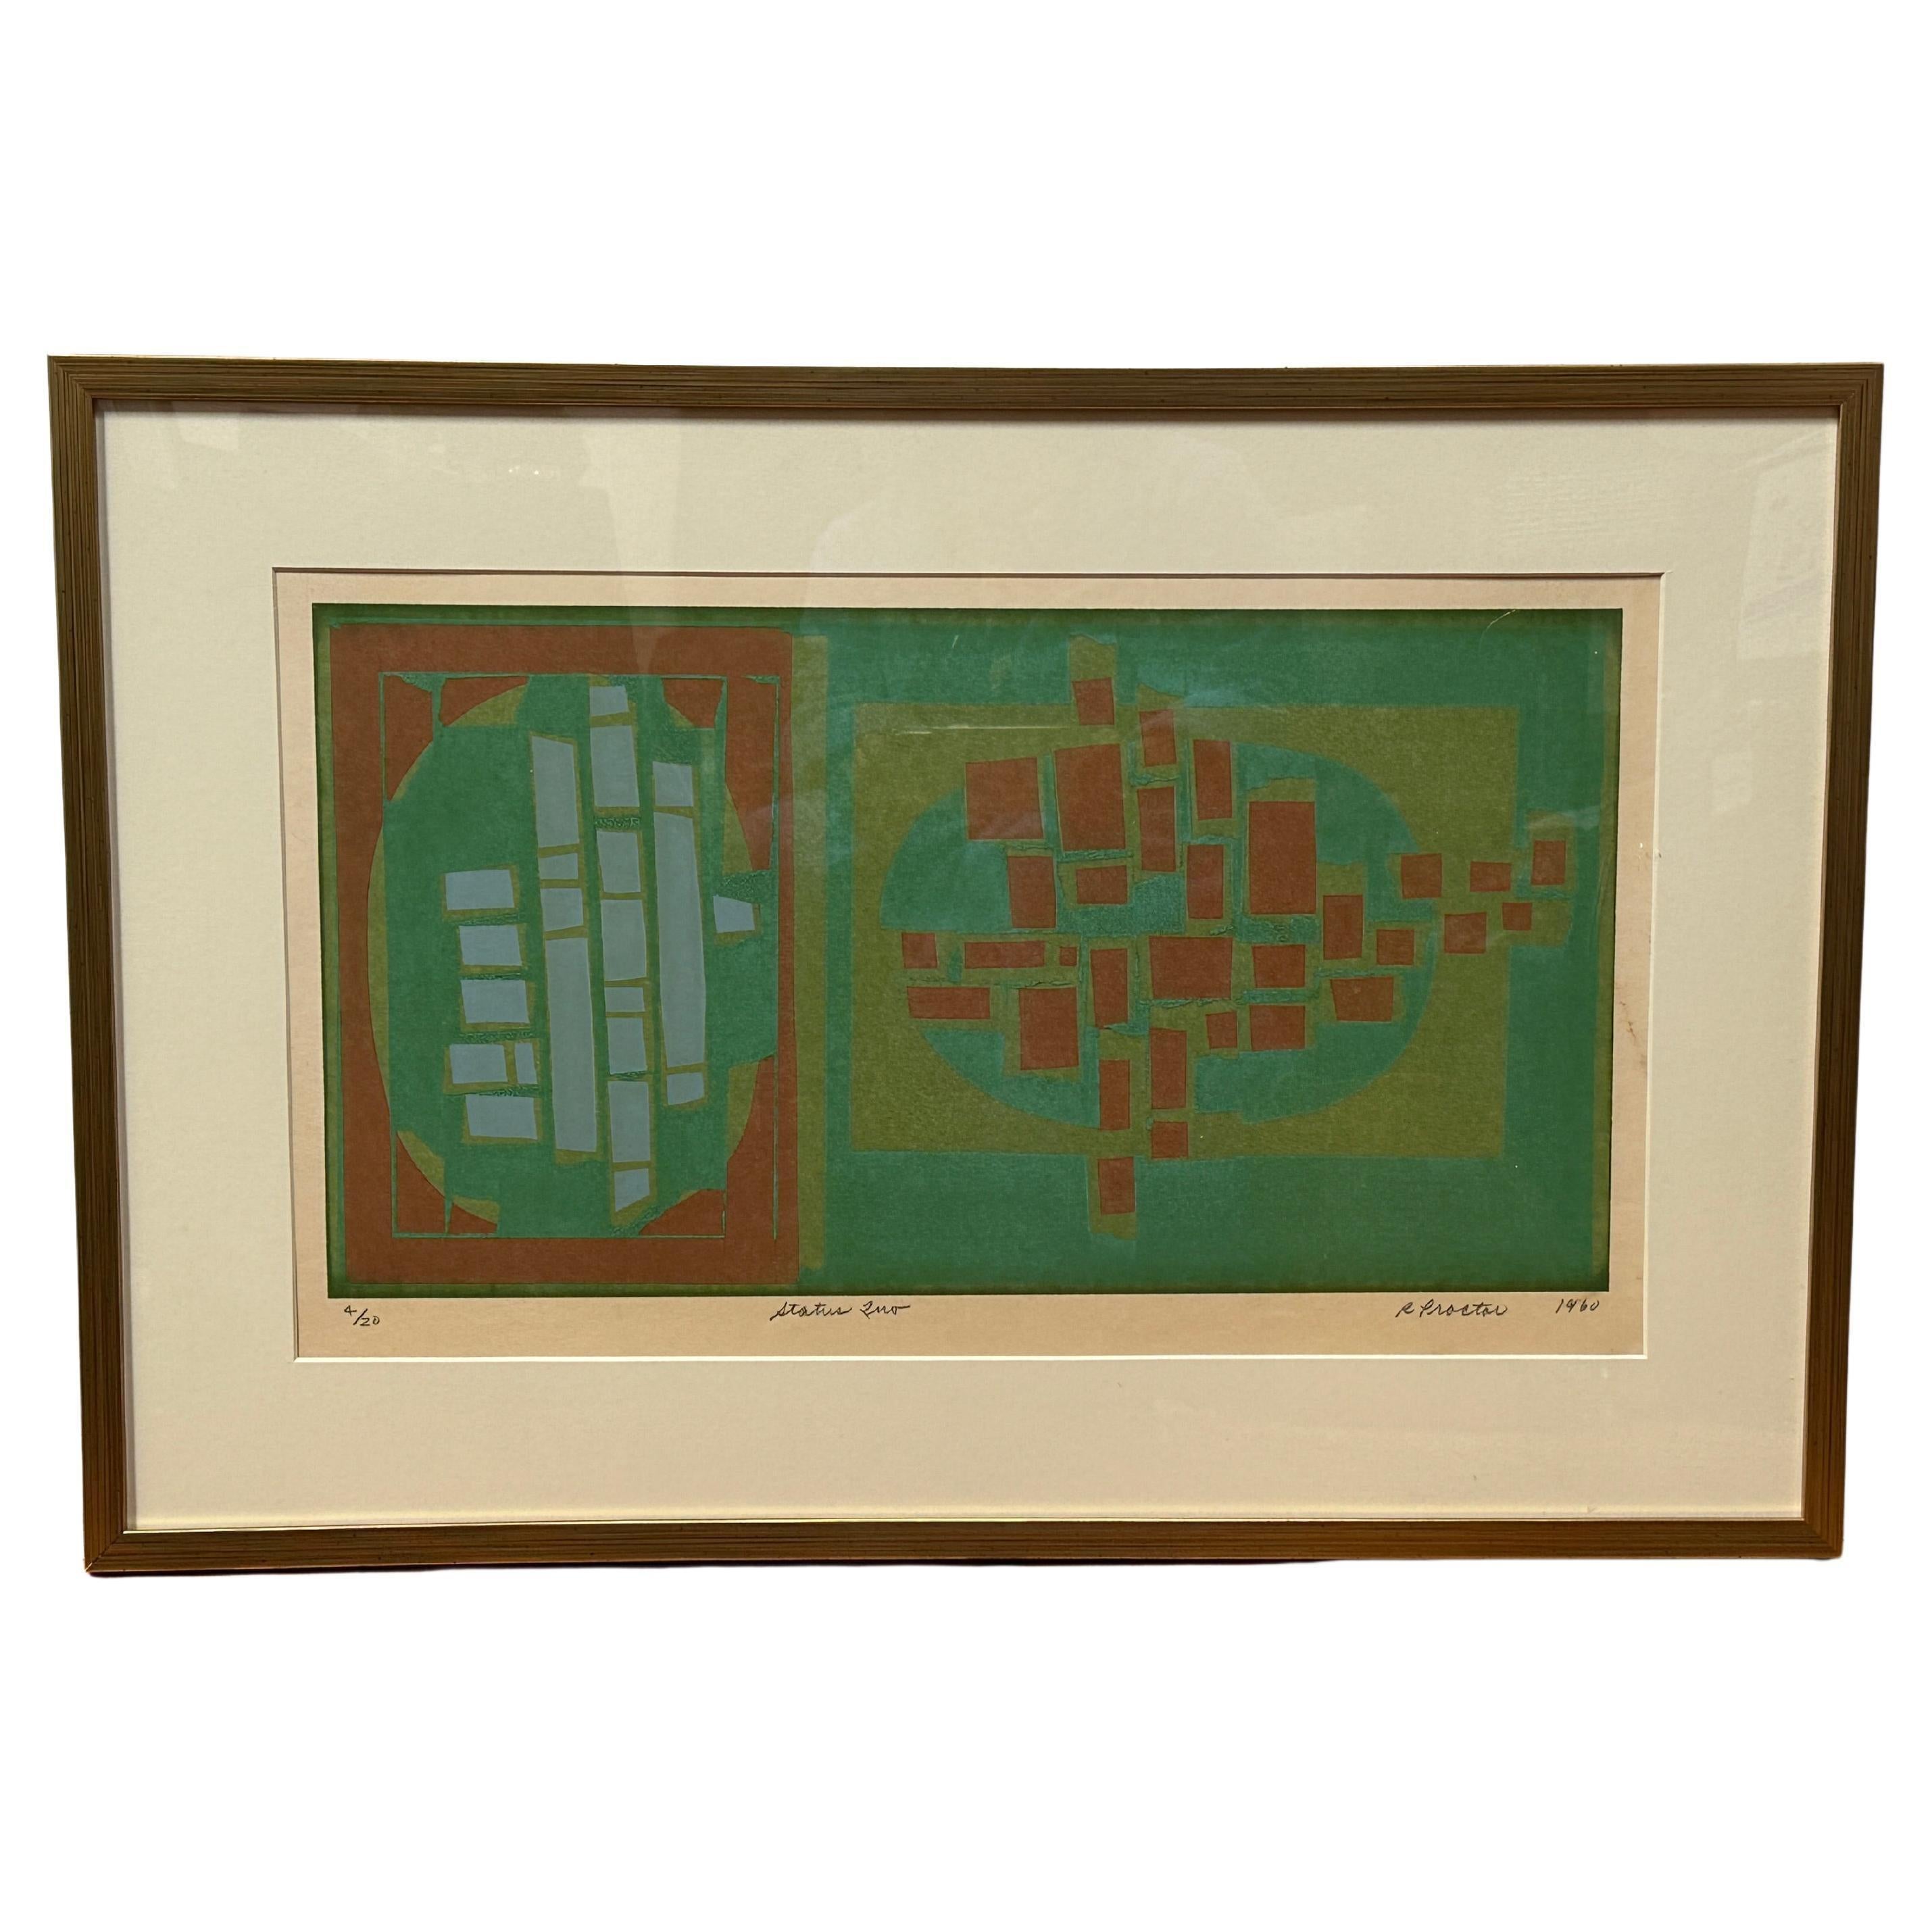 This lithograph, hand-signed by Richard Proctor, is titled "Status Quo" and numbered 4/20. stands as a testament to the artist's brilliance. 

Dominated by a green palette, "Status Quo" captivates with its intricate design. Proctor employs a